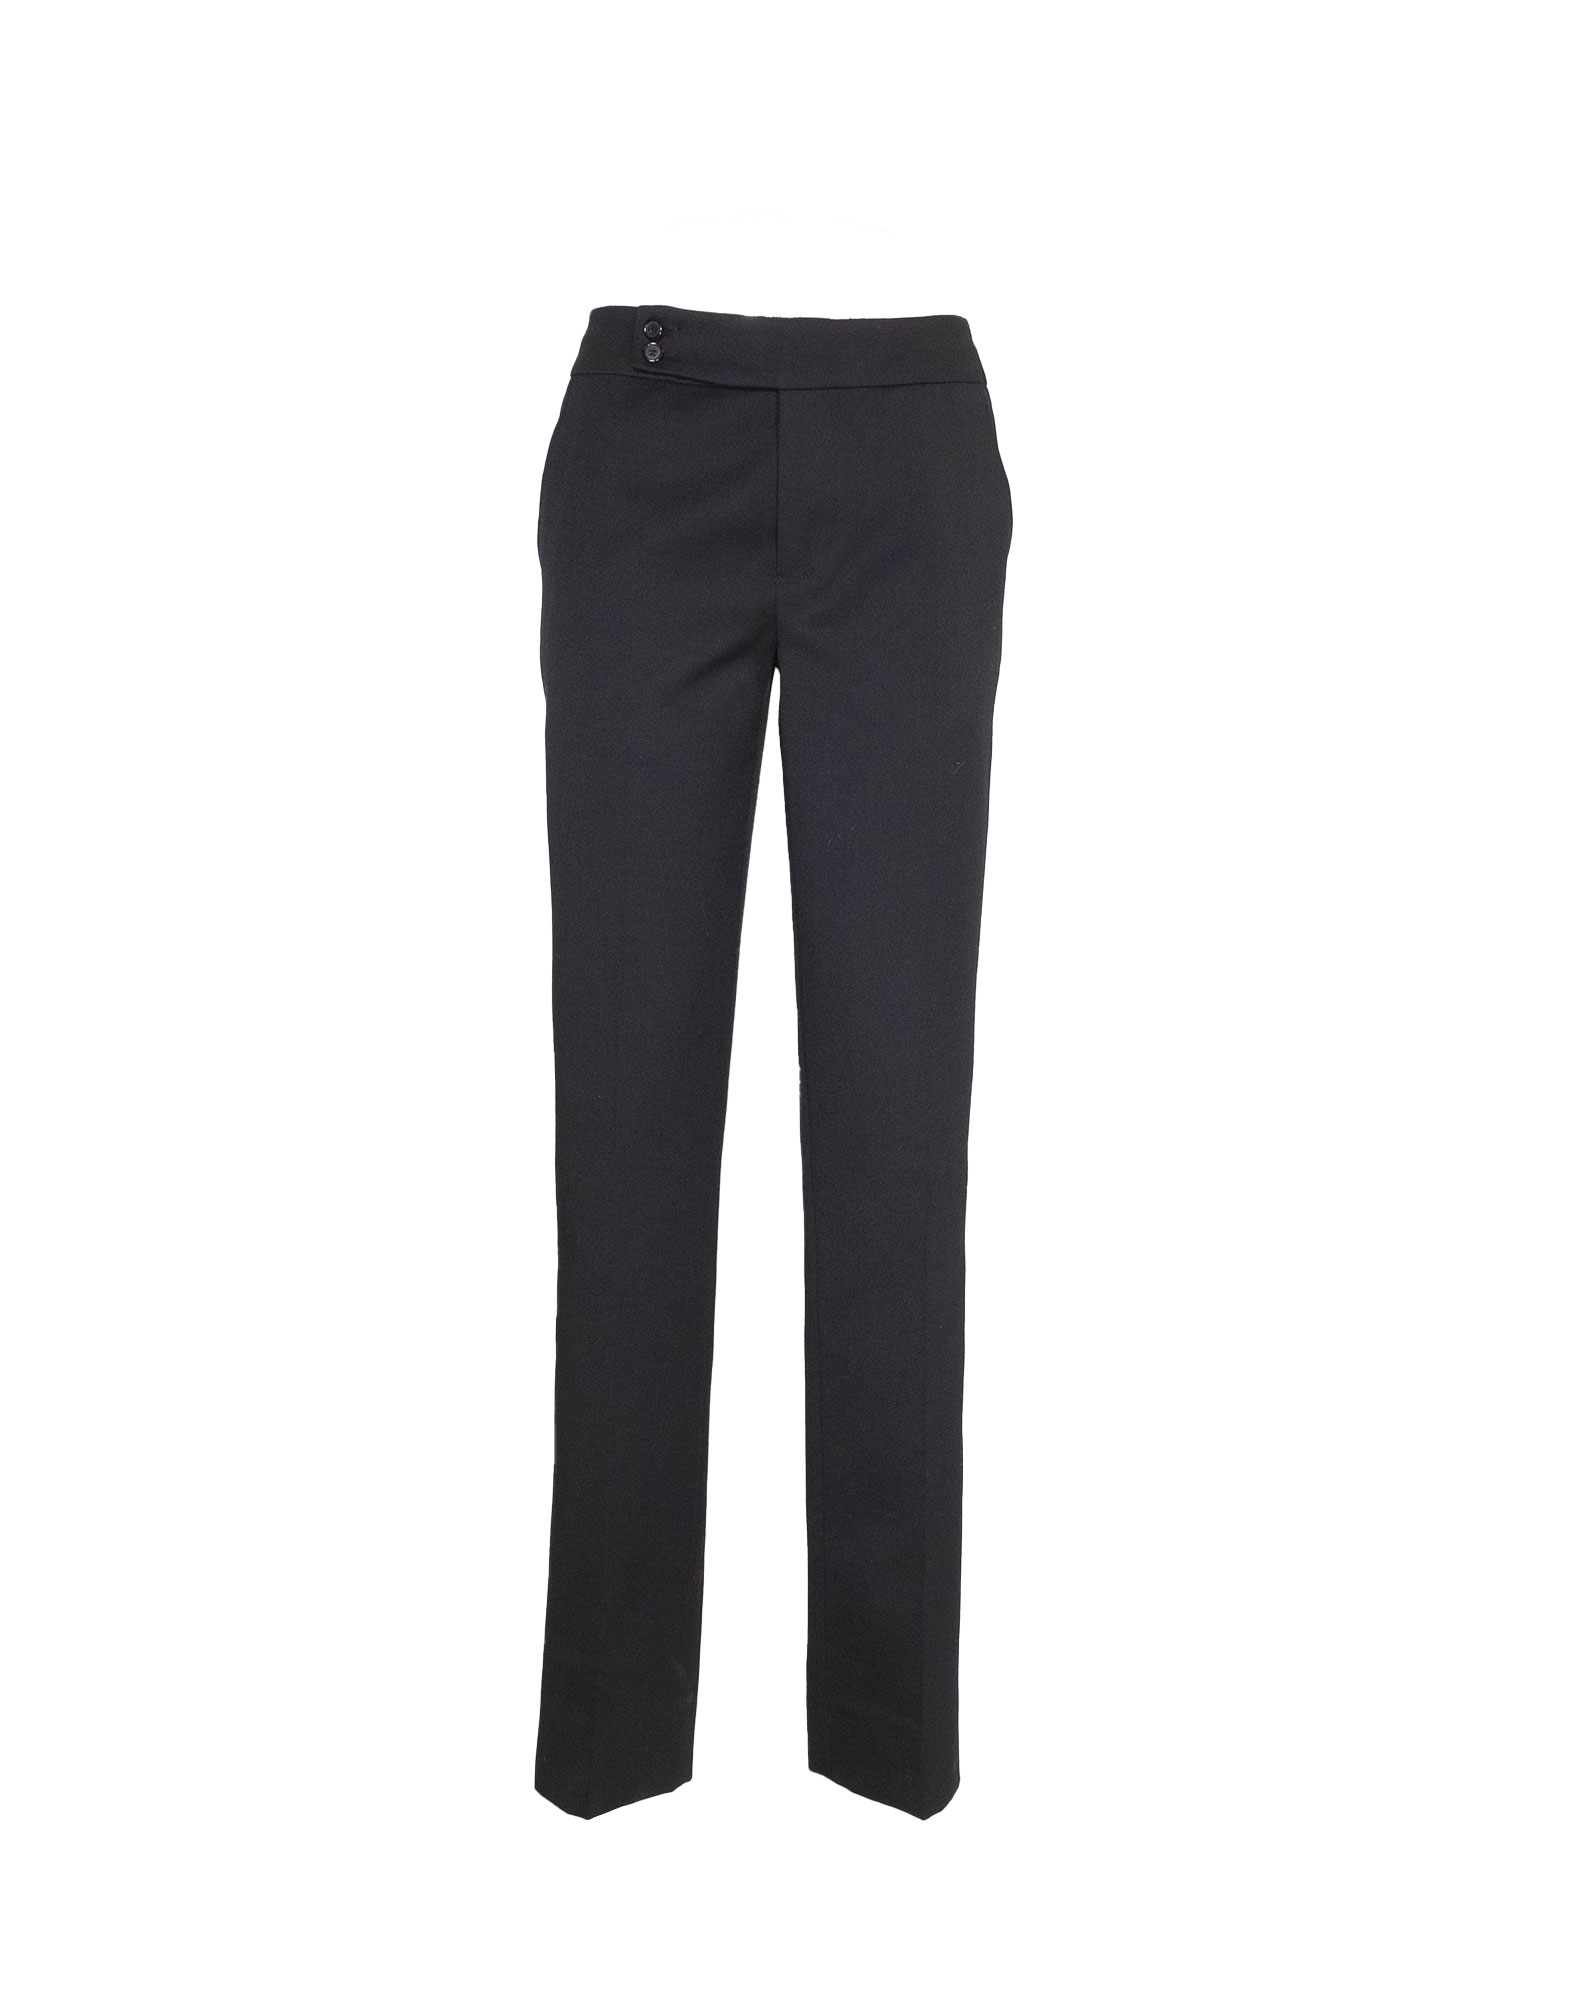 Marni - Black straight pants in polyester